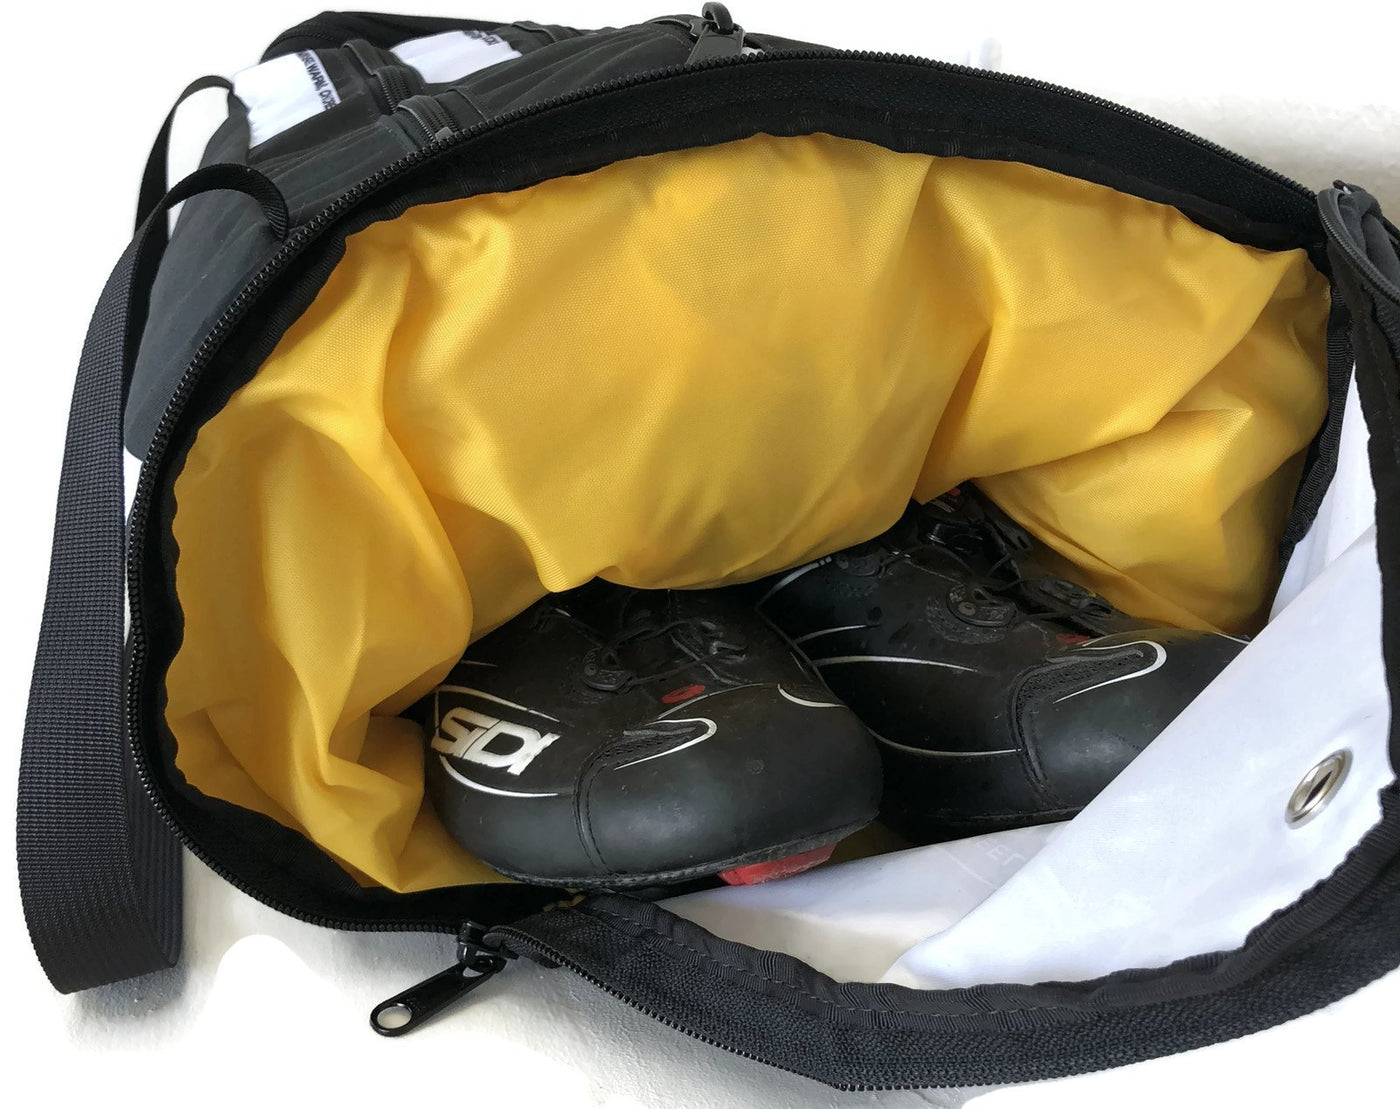 Traxxion RACEDAY BAG - ships in about 3 weeks.